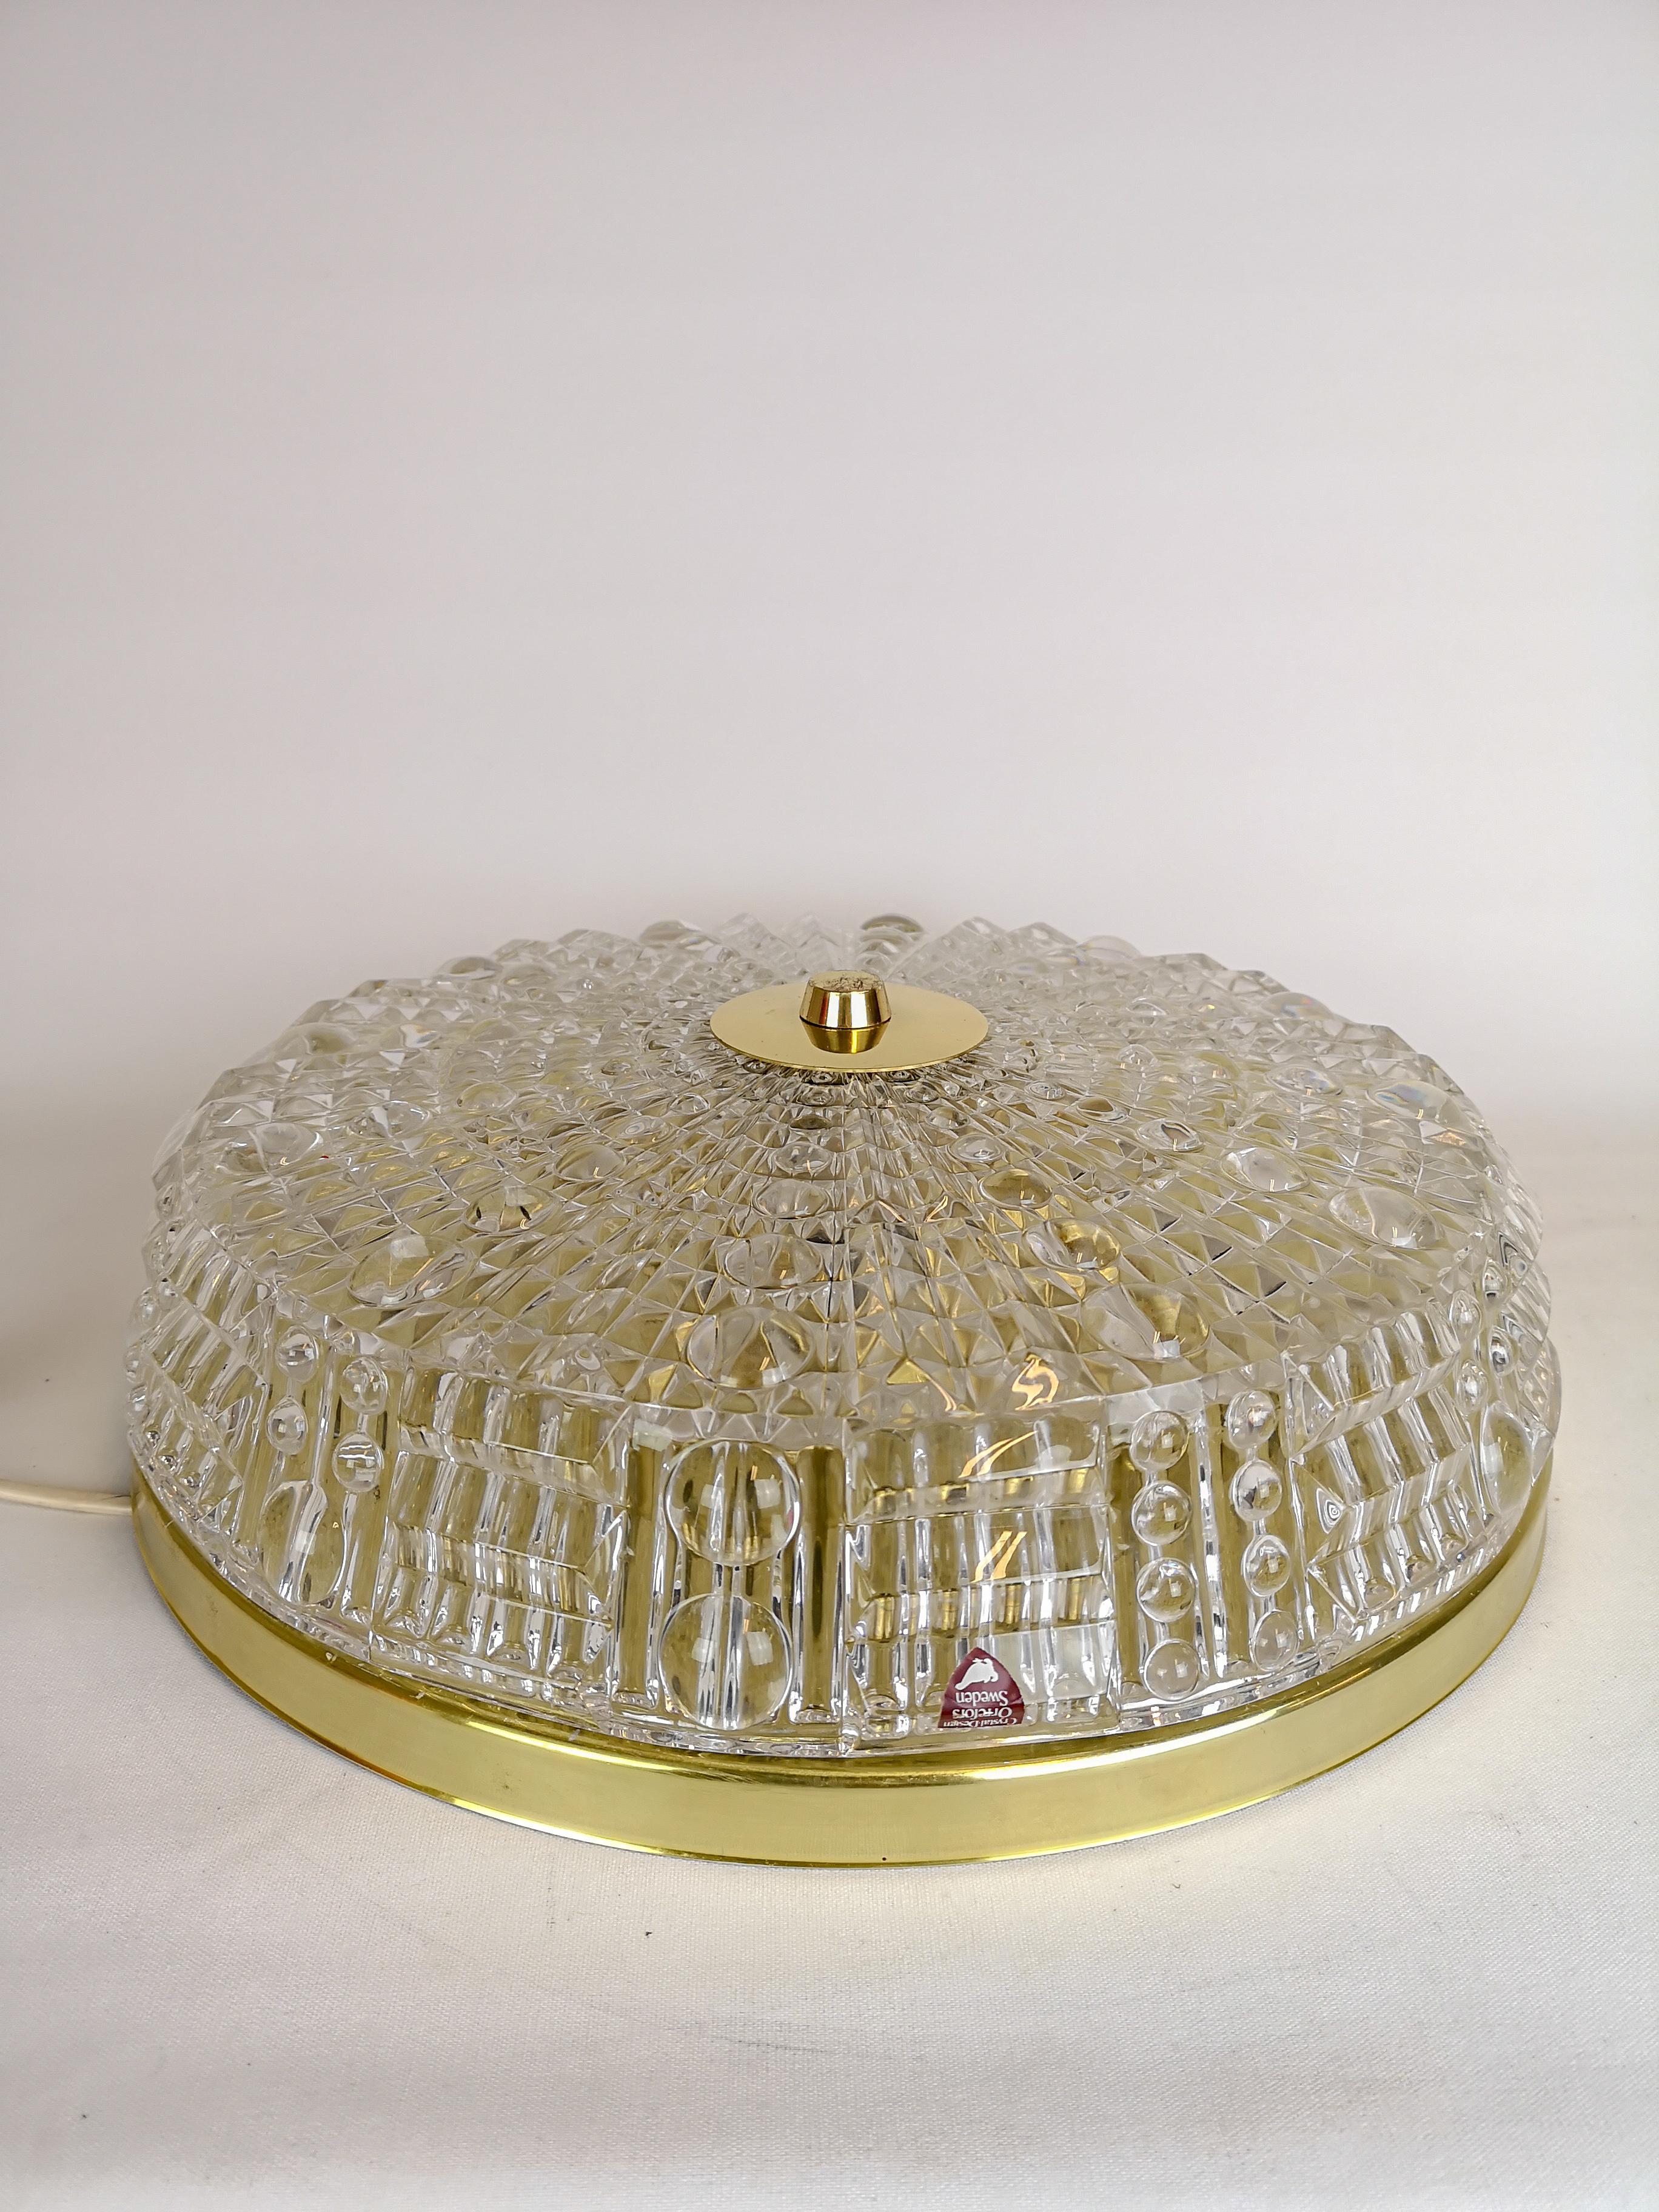 Carl Fagerlund for Orrefors crystal glass and brass ceiling light fixture, circa mid-1970s. This lovely example is pressed clear crystal glass with brass accents. 

Good working condition. 

Measures: D 40 cm, H 11.